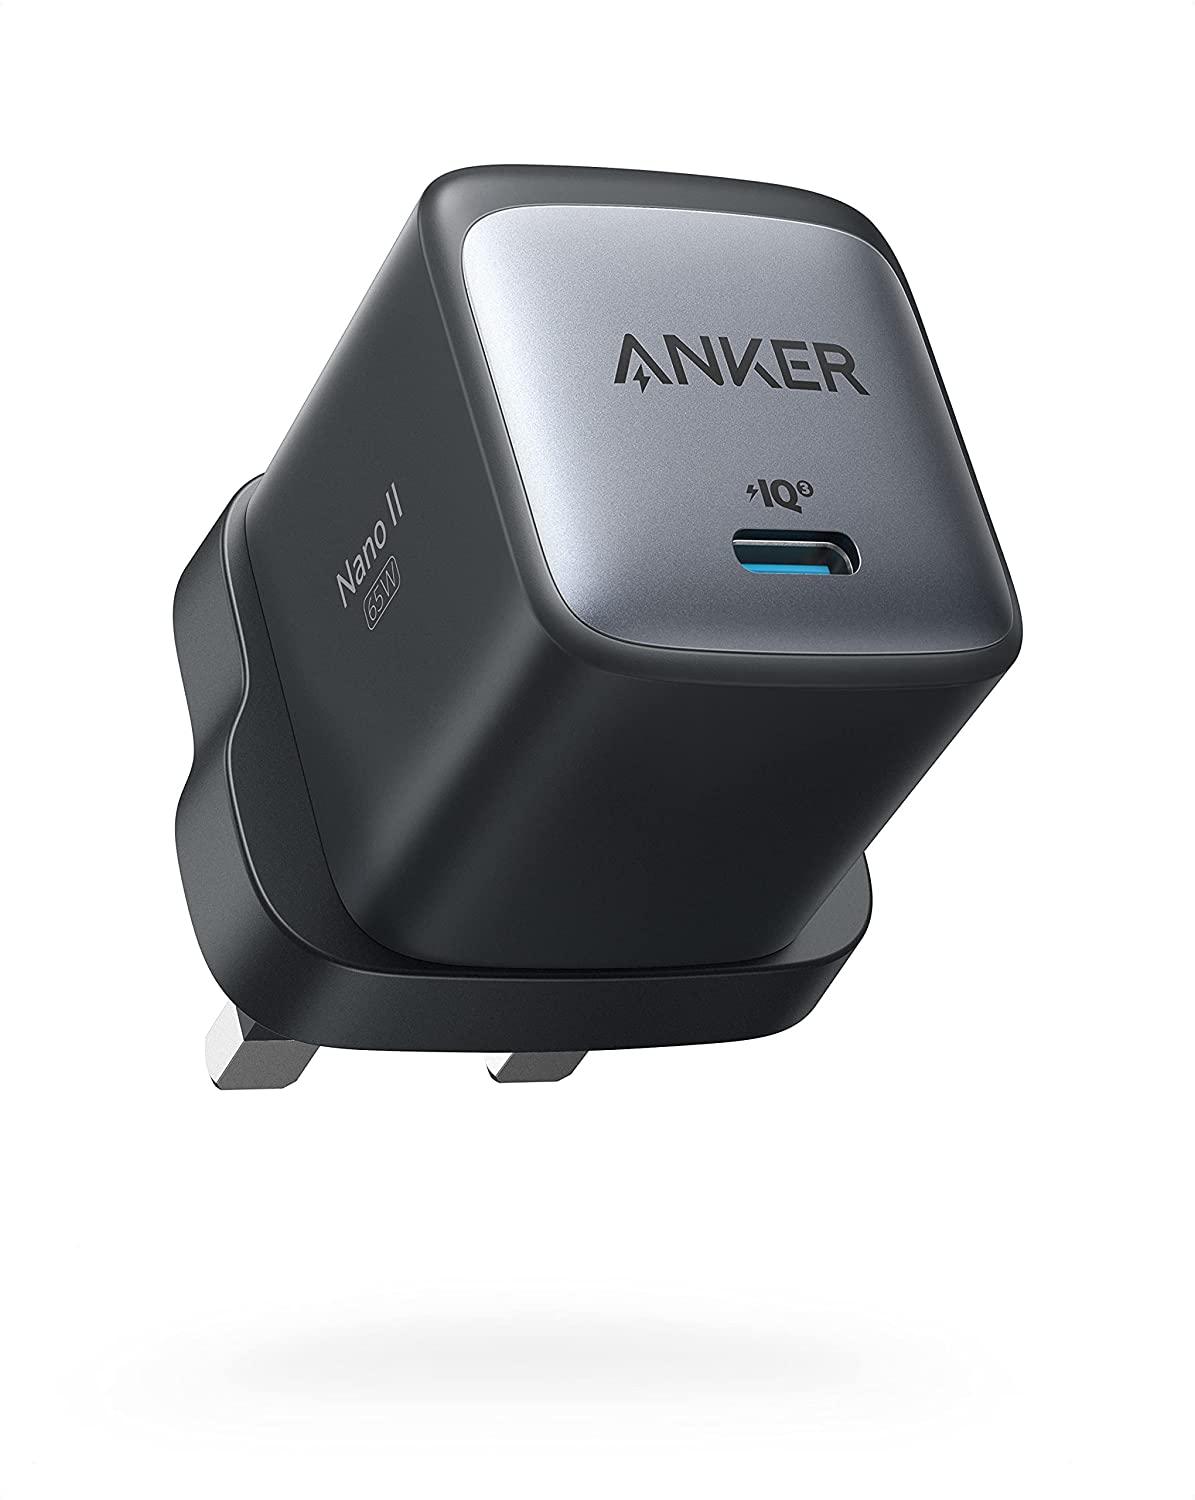 Anker's Nano II USB-C Chargers Pack Up to 65W of Power in a Smaller Design 